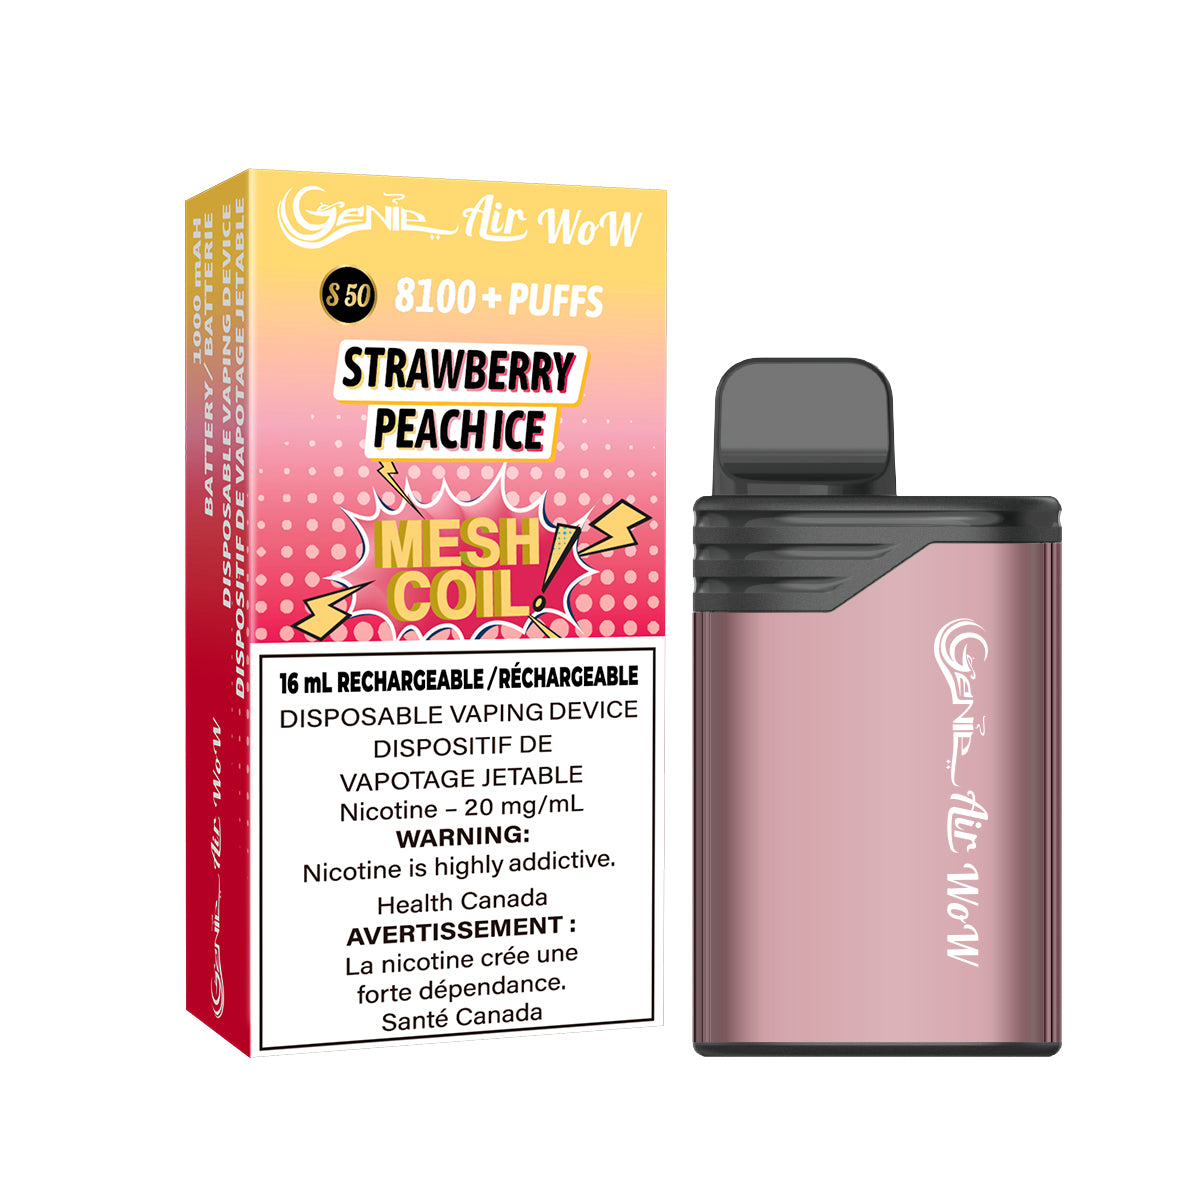 GENIE AIR WOW - strawberry peach ice 8100 Puffs  20 mg / mL Salt Nicotine  Juice Capacity: 16 mL  Battery: 1000 mAh Rechargeable   Mesh Coil Technology    s50